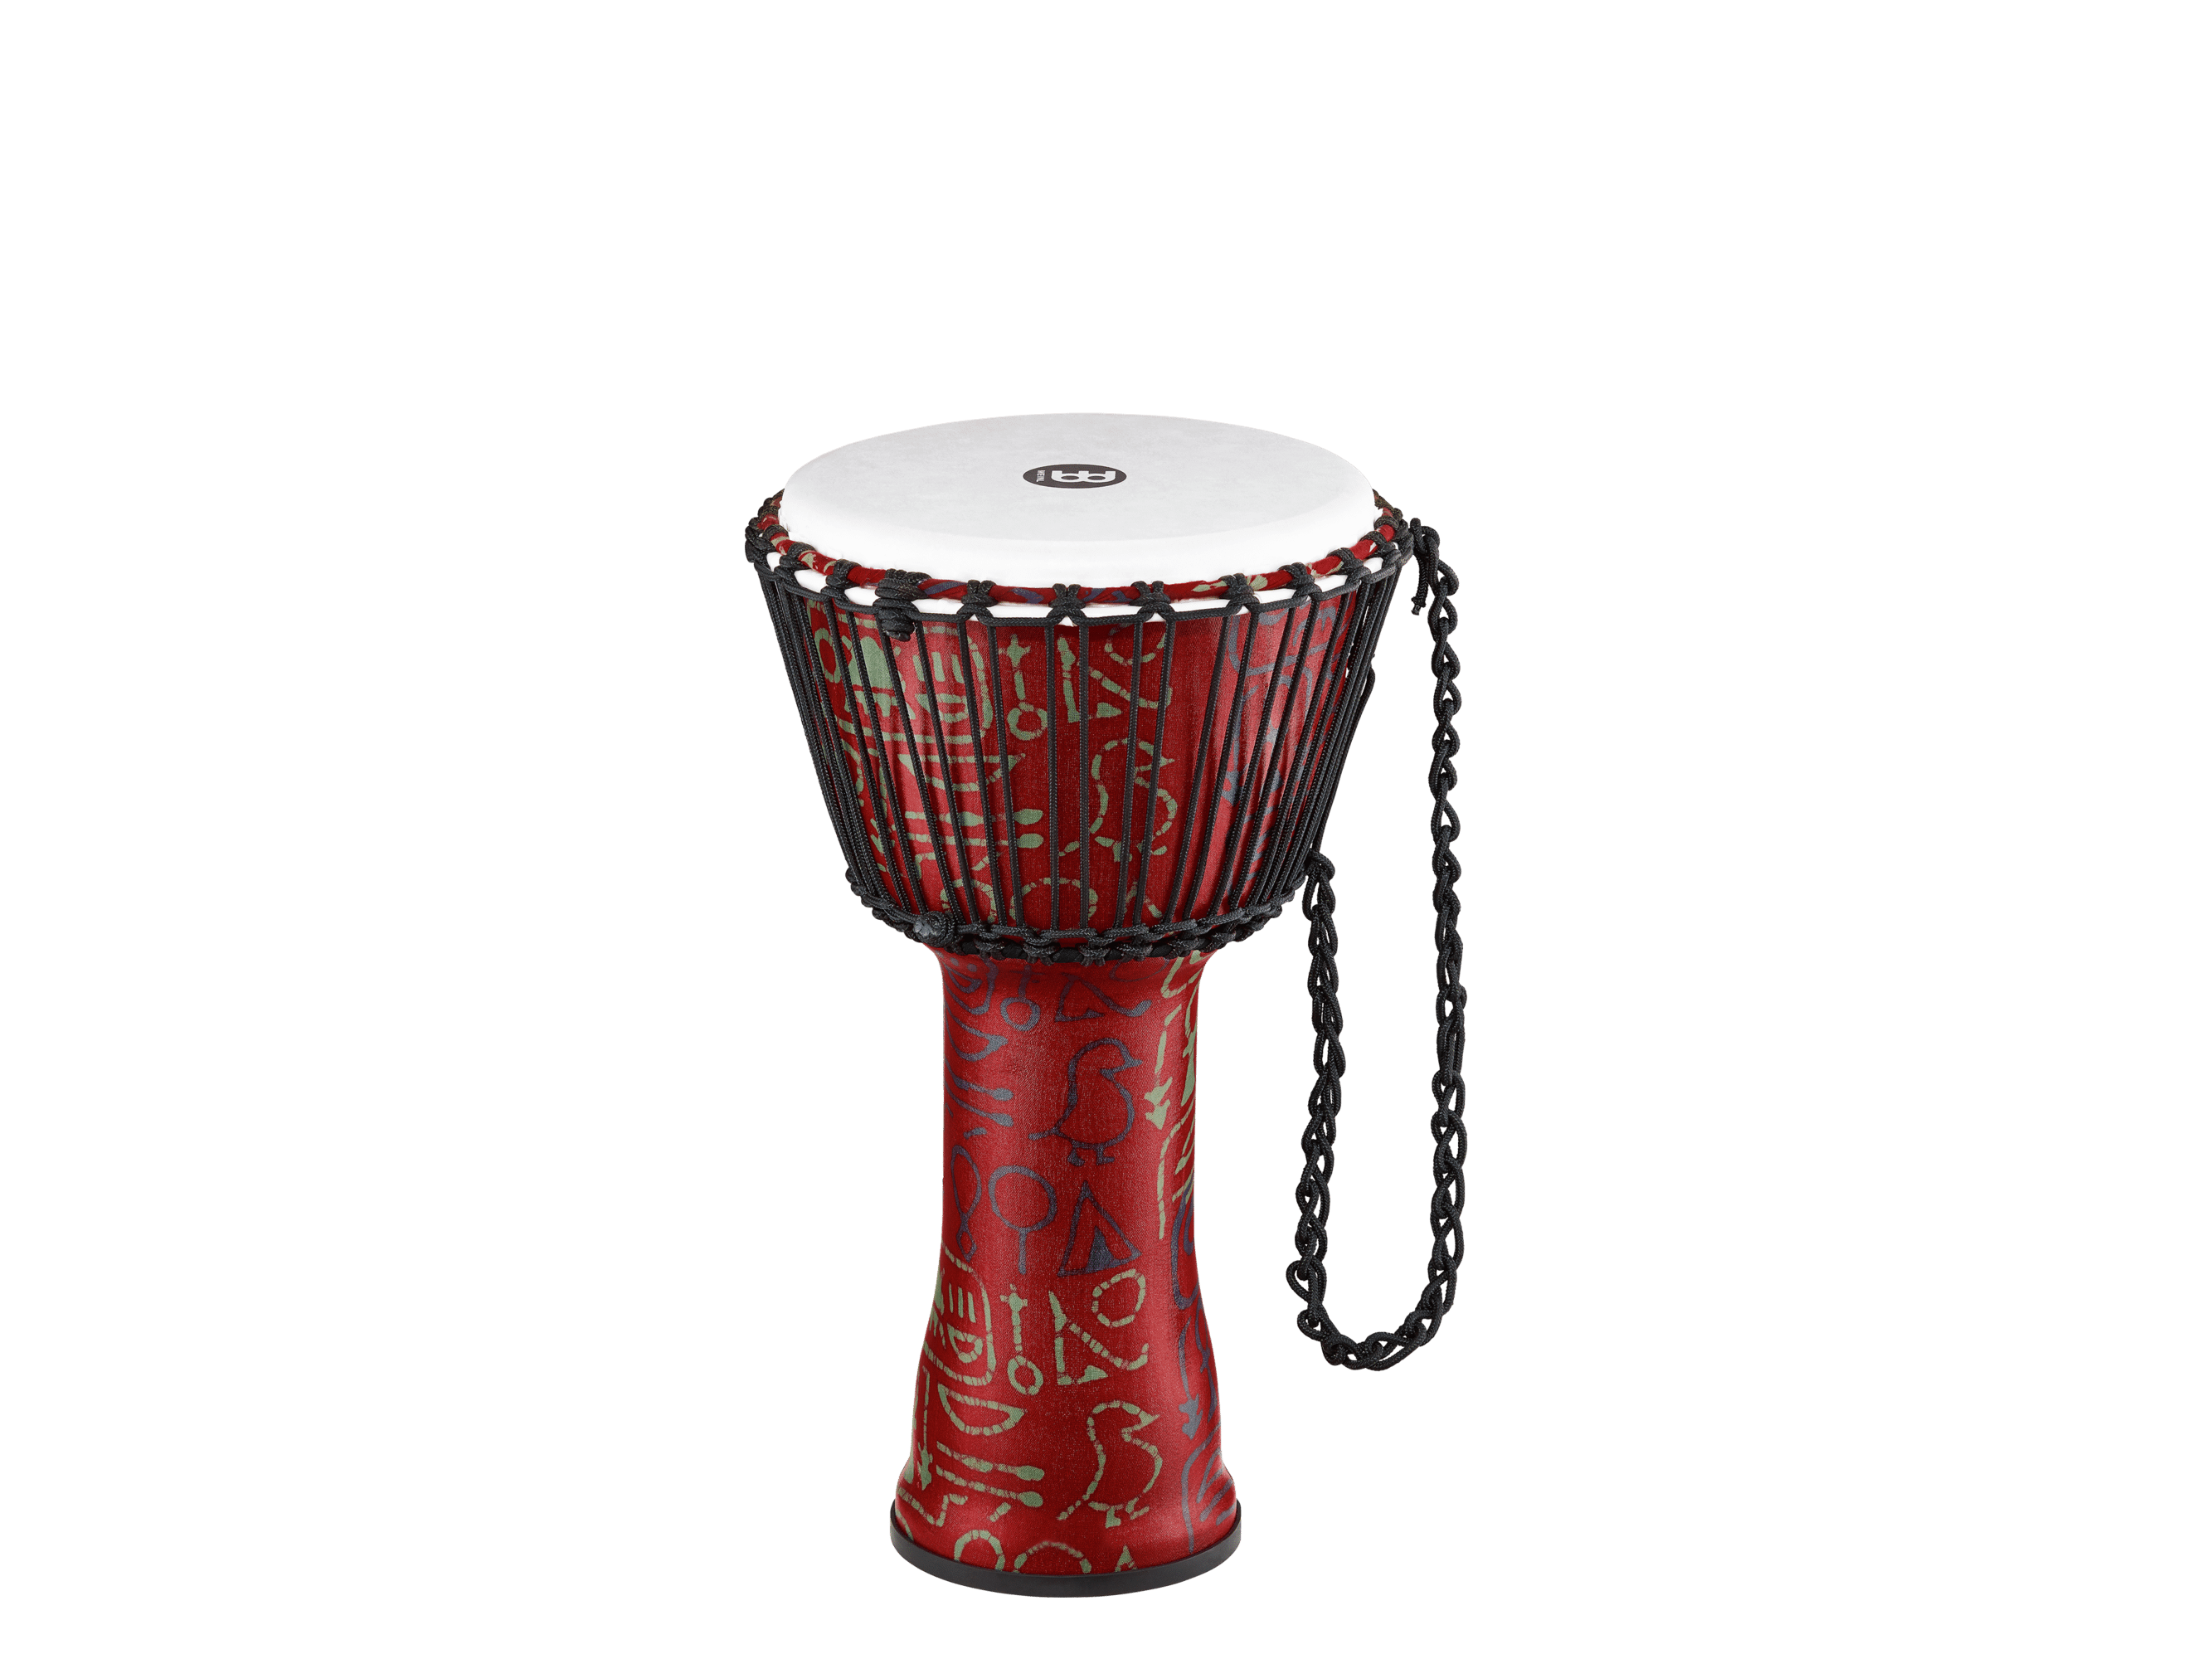 8 Small Size PMDJ2-S-G S Meinl Percussion Travel Djembe with Synthetic Shell NOT MADE IN CHINA Mechanically Tuned Goat Skin Head 8 2-YEAR WARRANTY Kenyan Quilt 